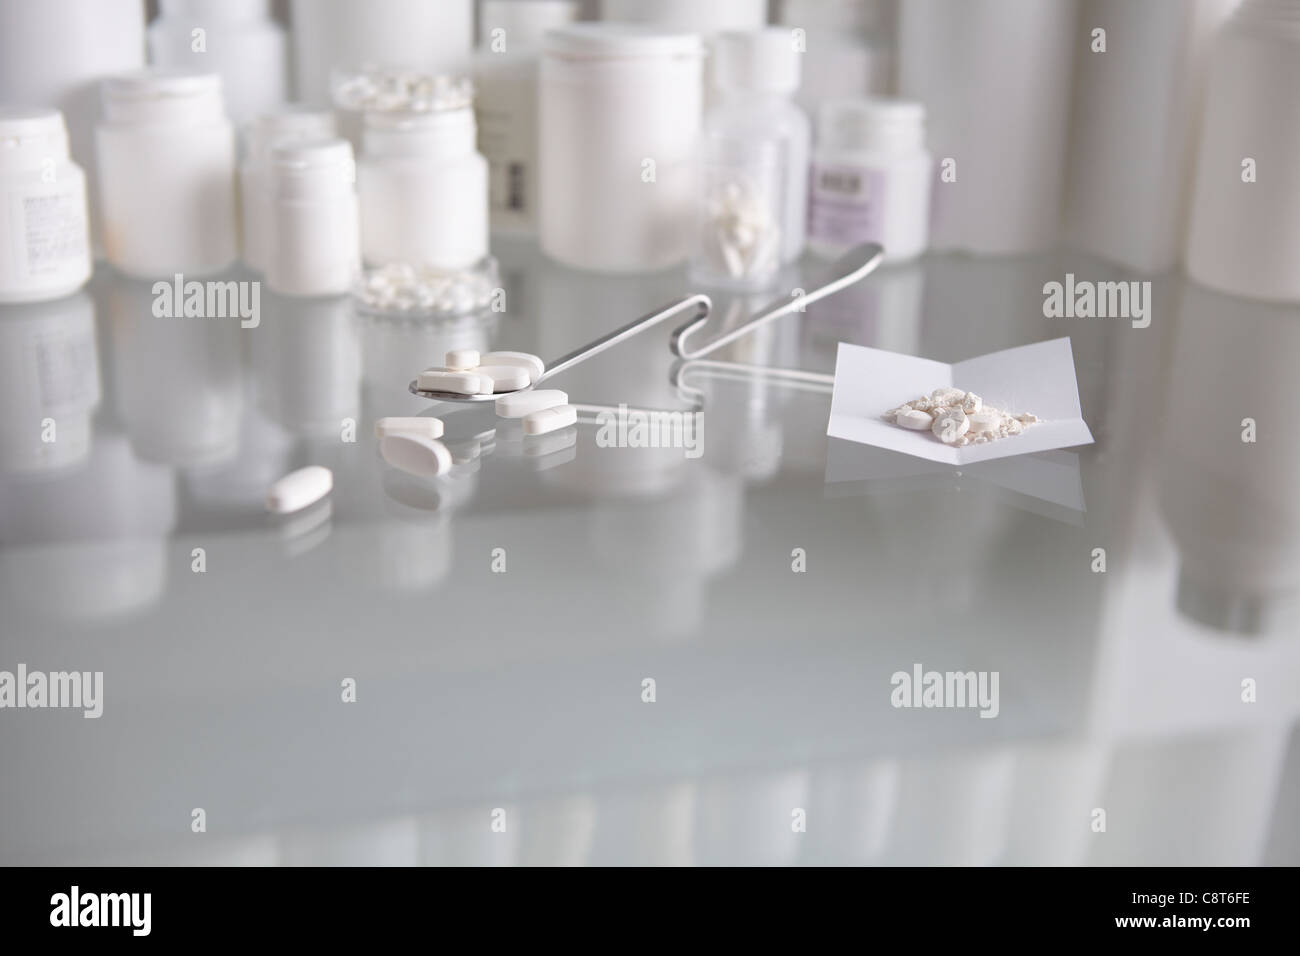 Pills on paper along with medical equipment kept on table with pill bottles in the background Stock Photo